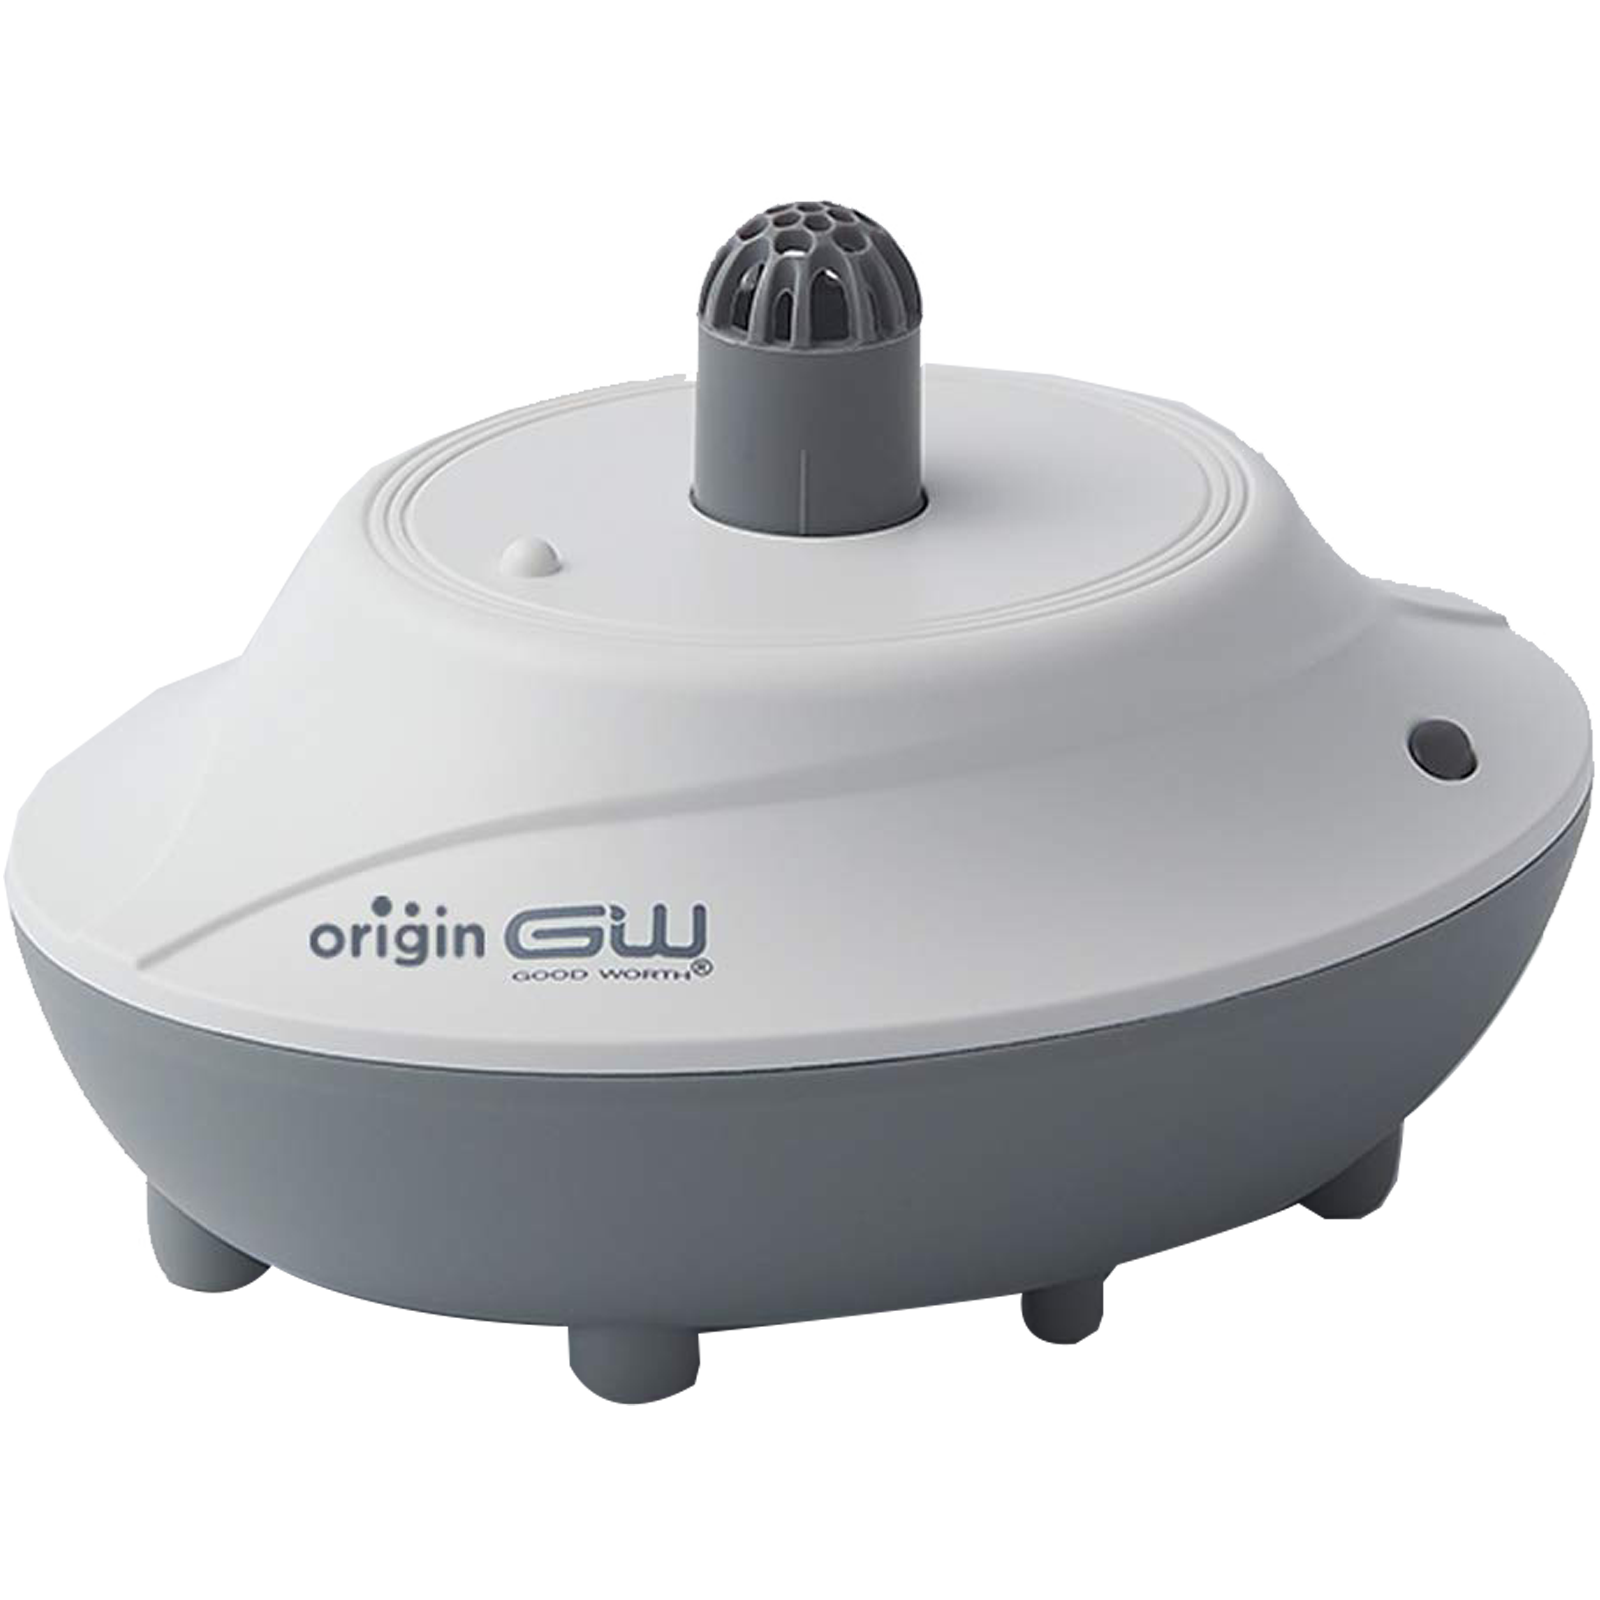 Origin Recharging Base Charger/Charging Dock for Dehumidifier (ORB1, White)_1